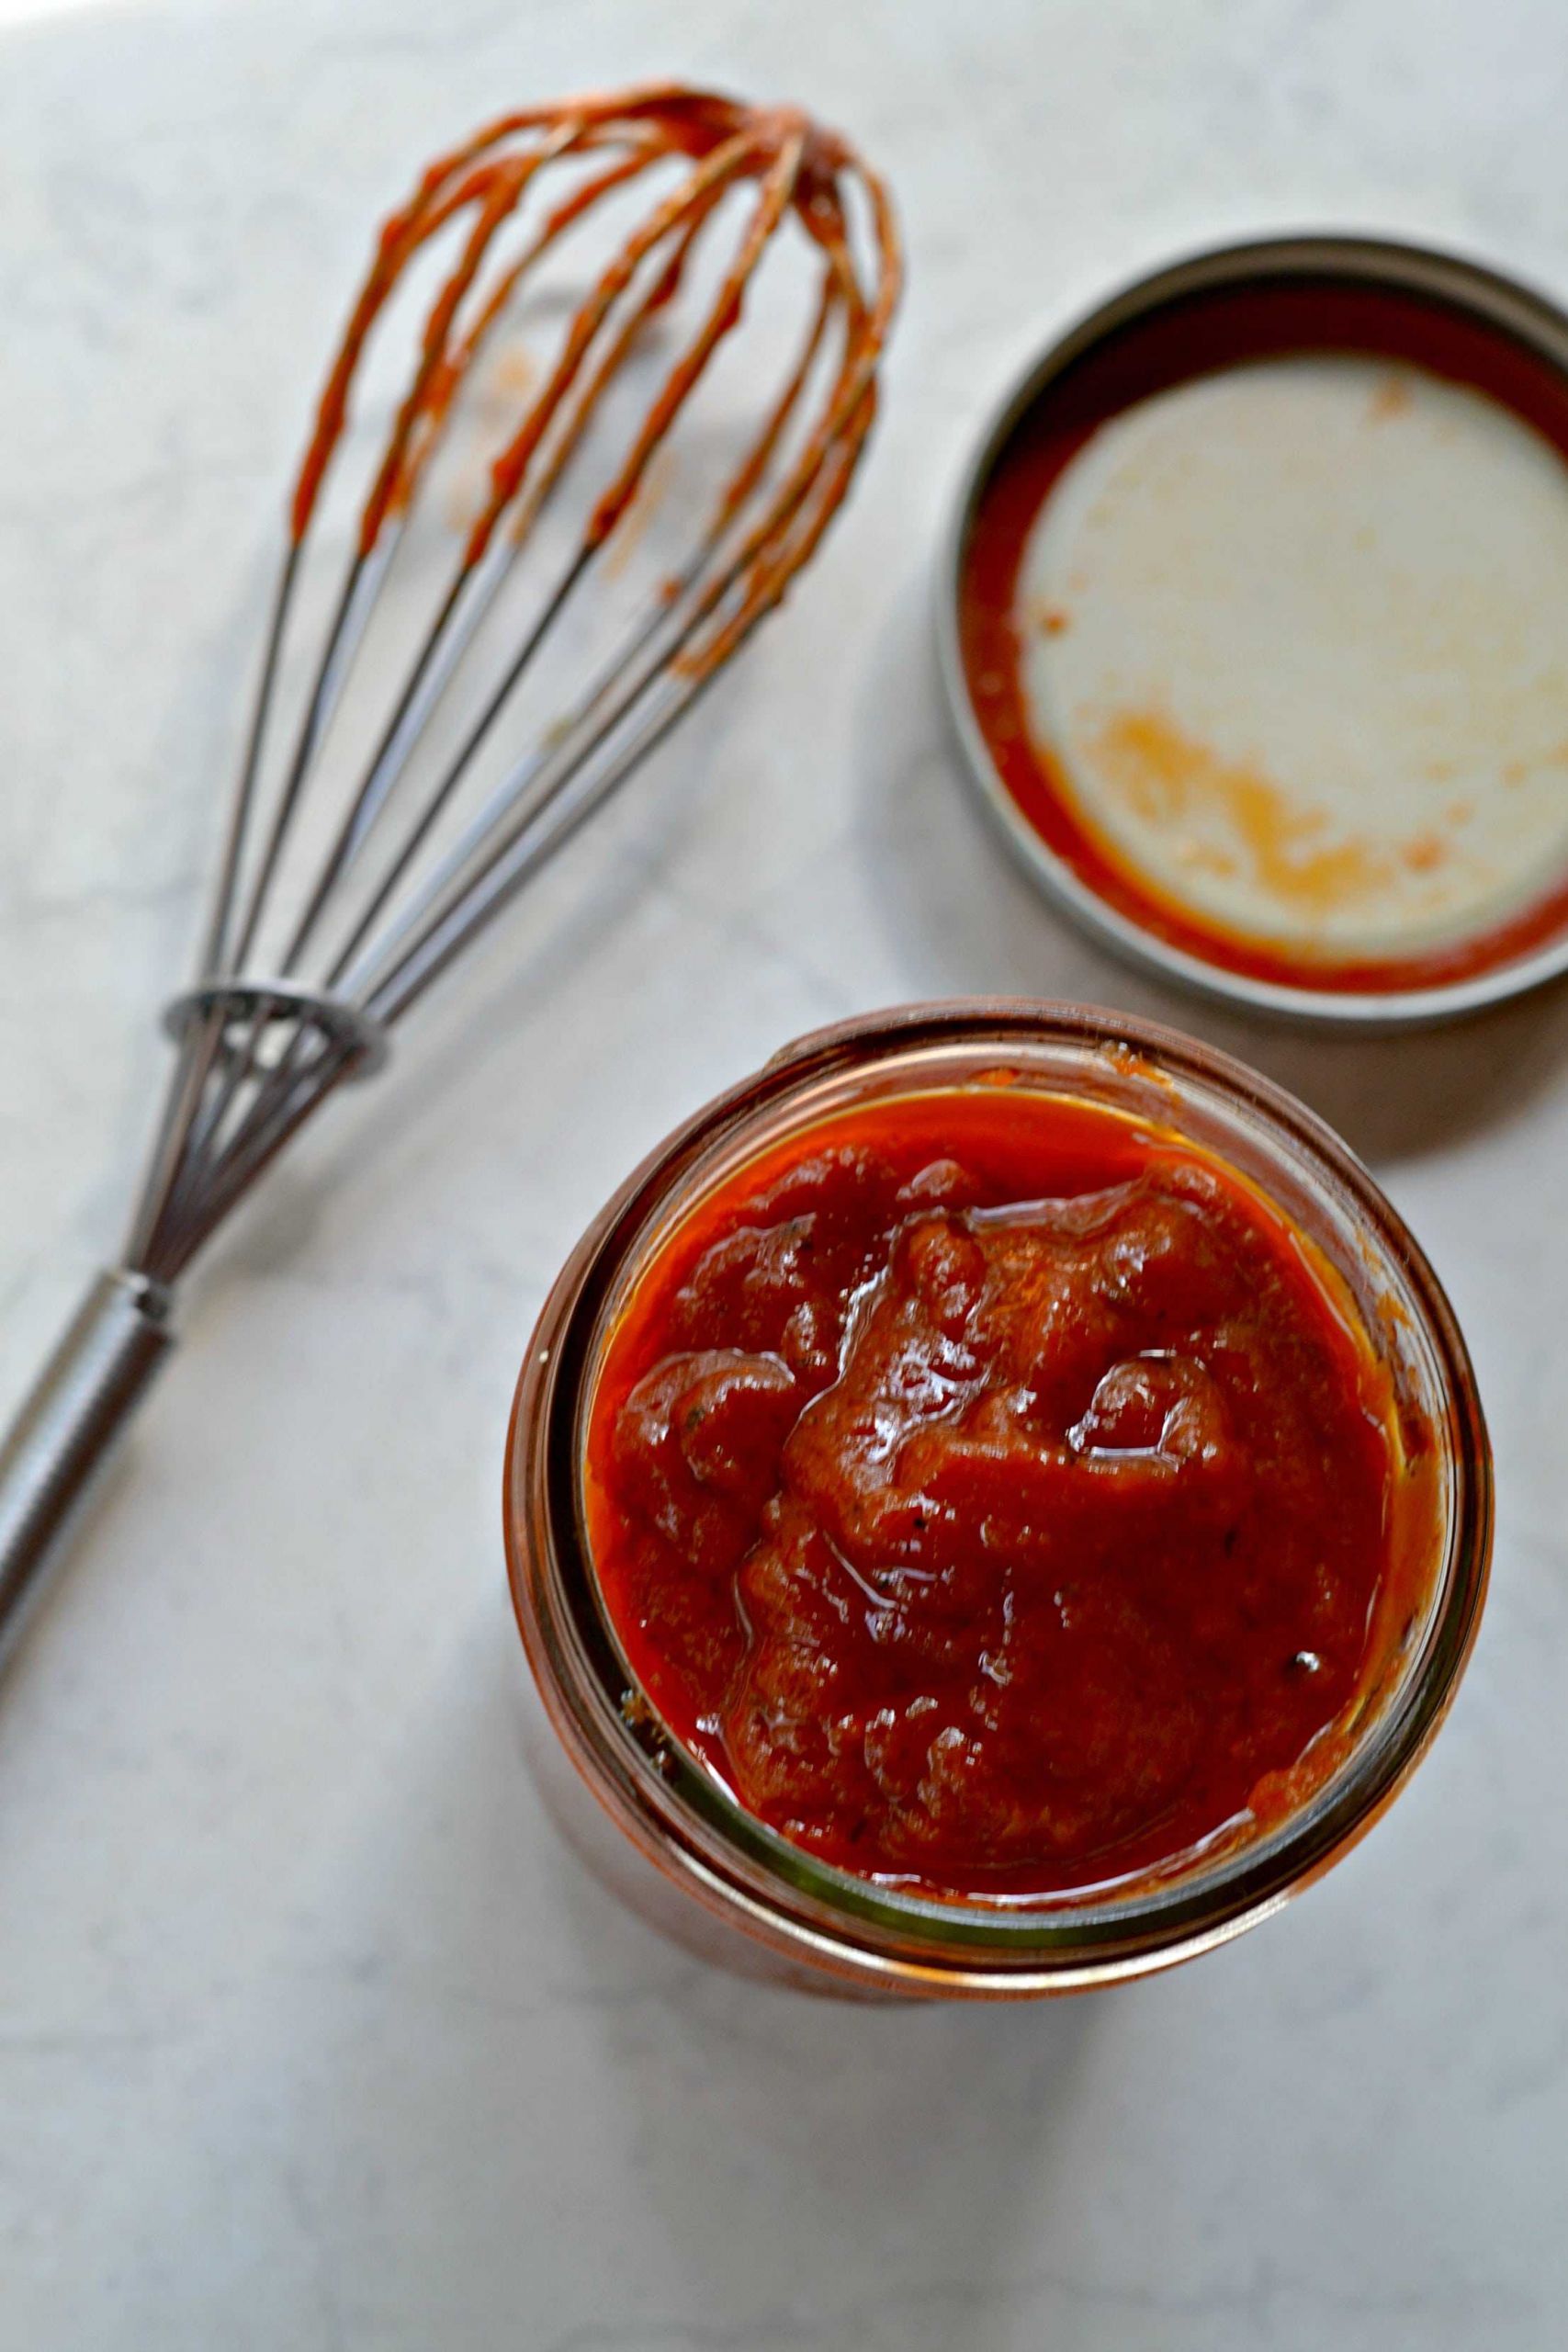 Pizza Sauce Tomato Paste
 Easy Pizza Sauce From Tomato Paste 4 Hats and Frugal